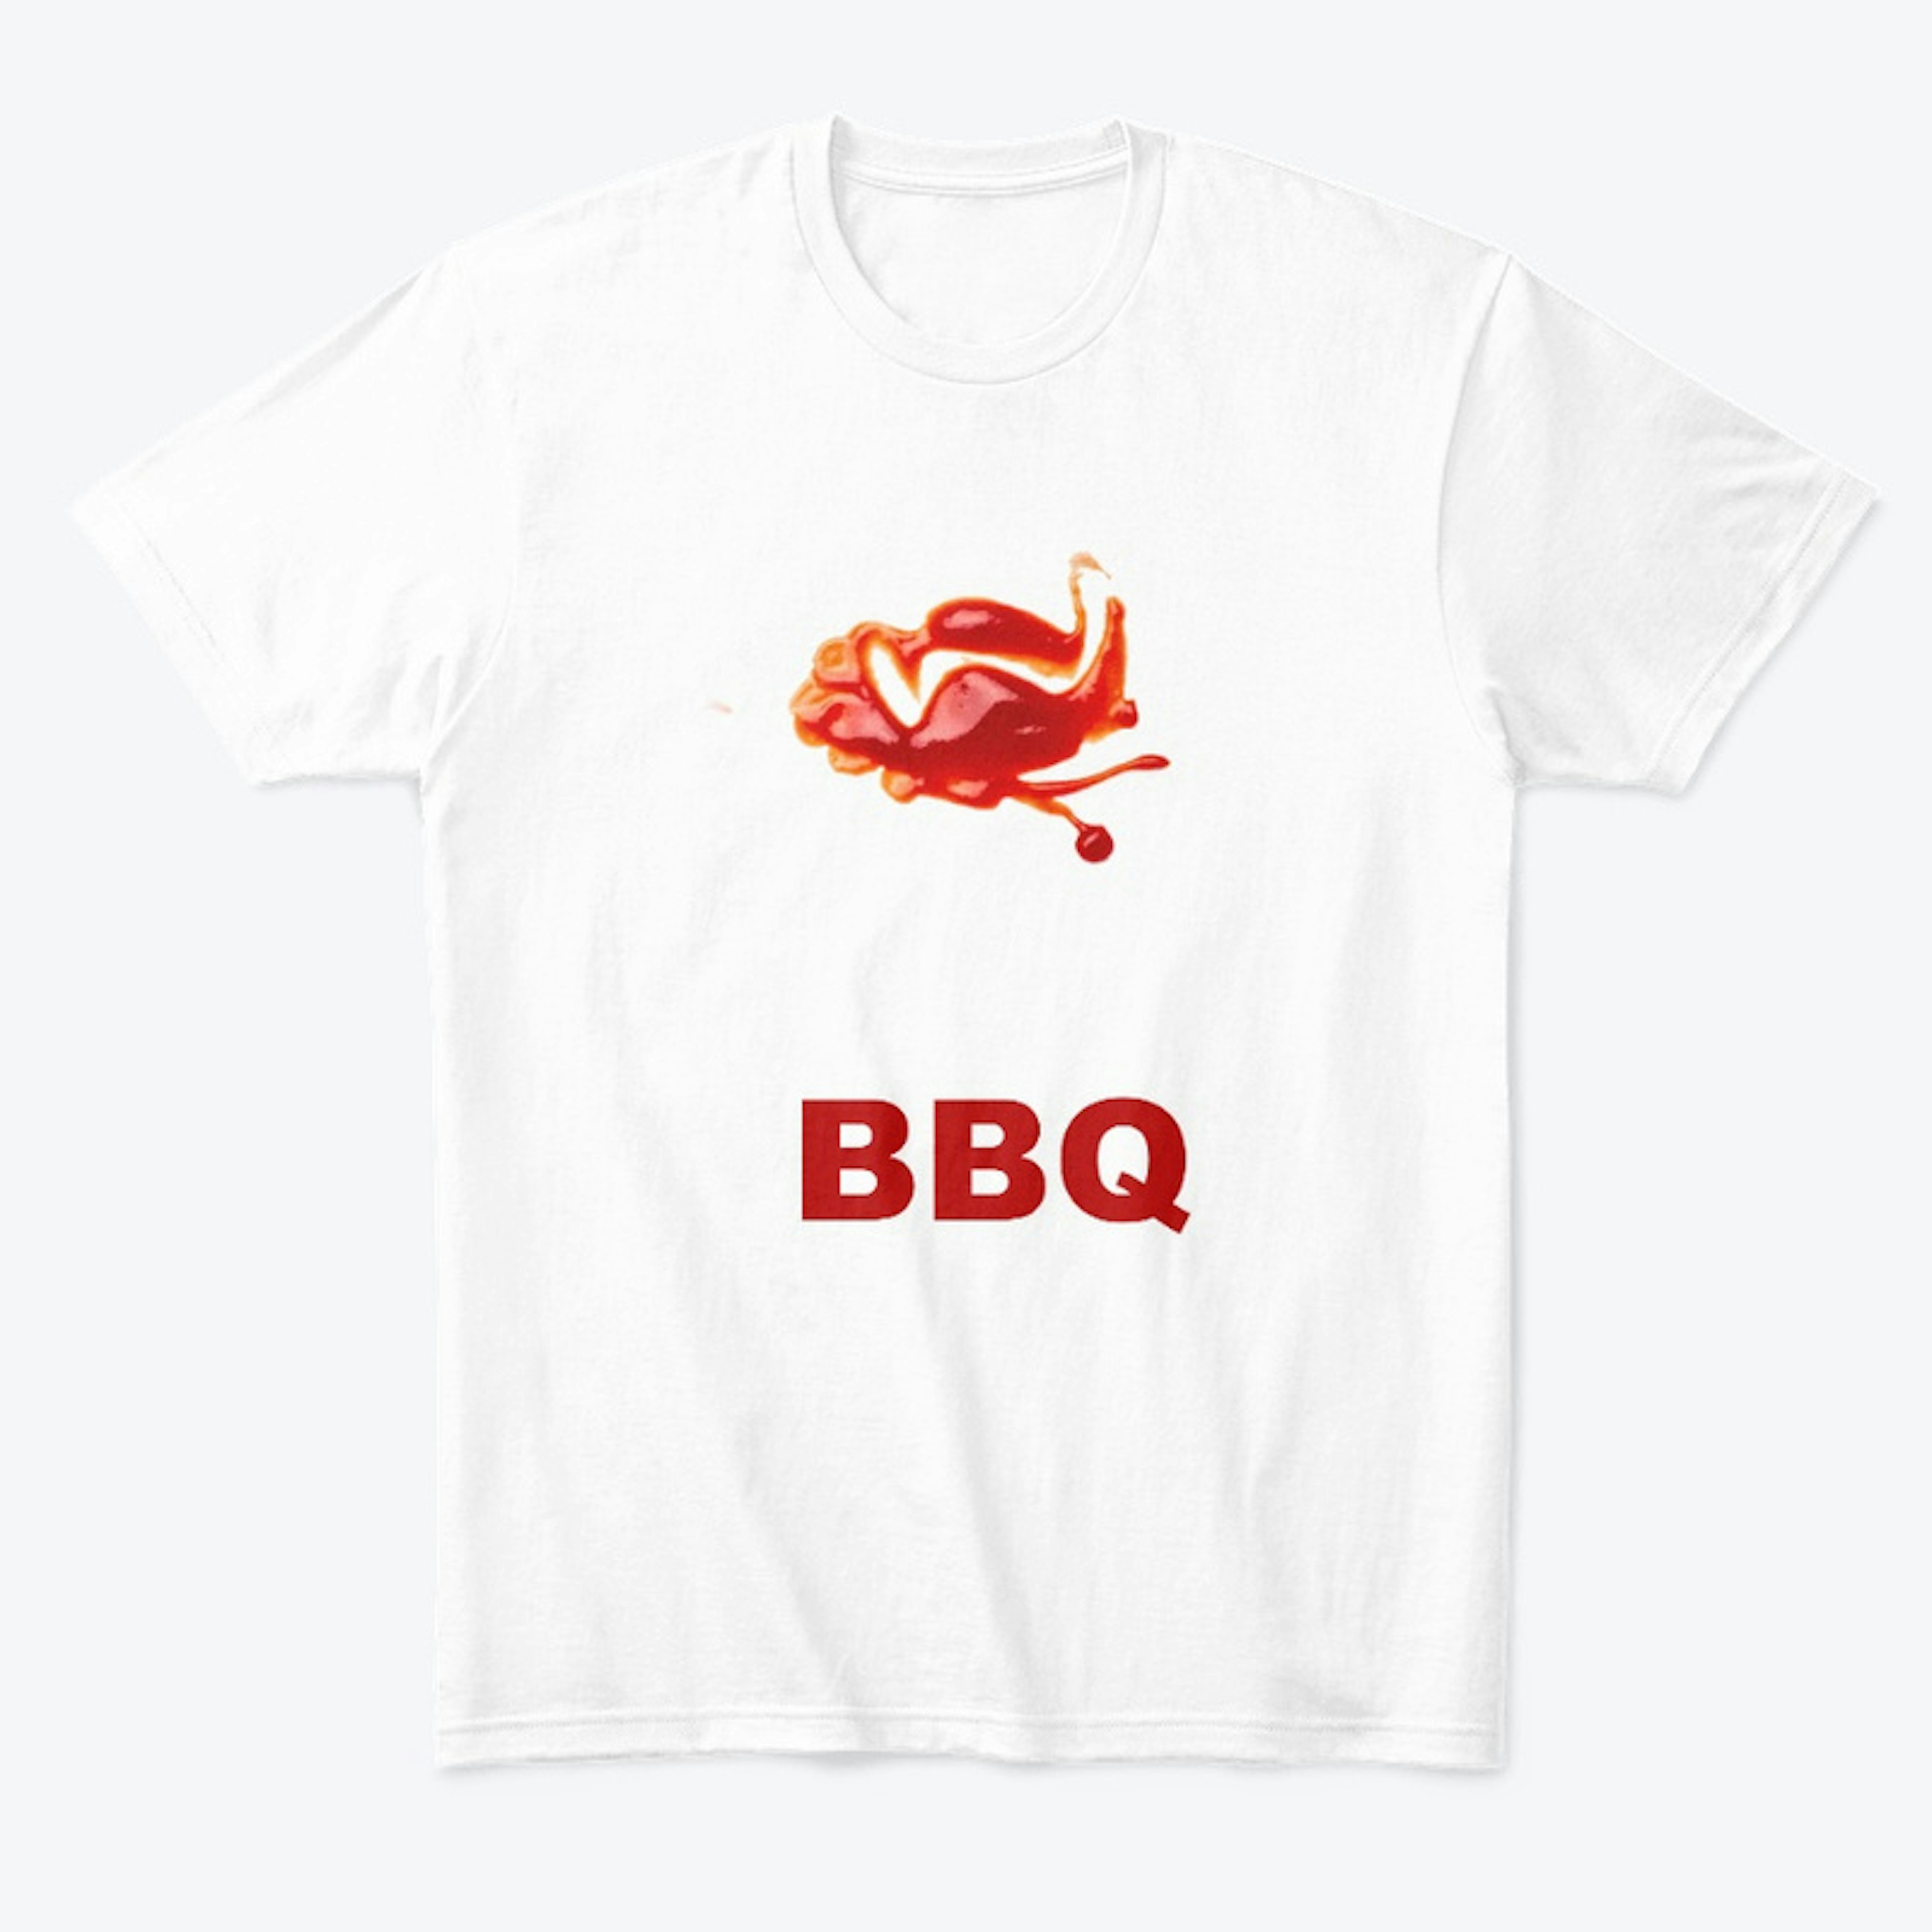 BBQ STAIN